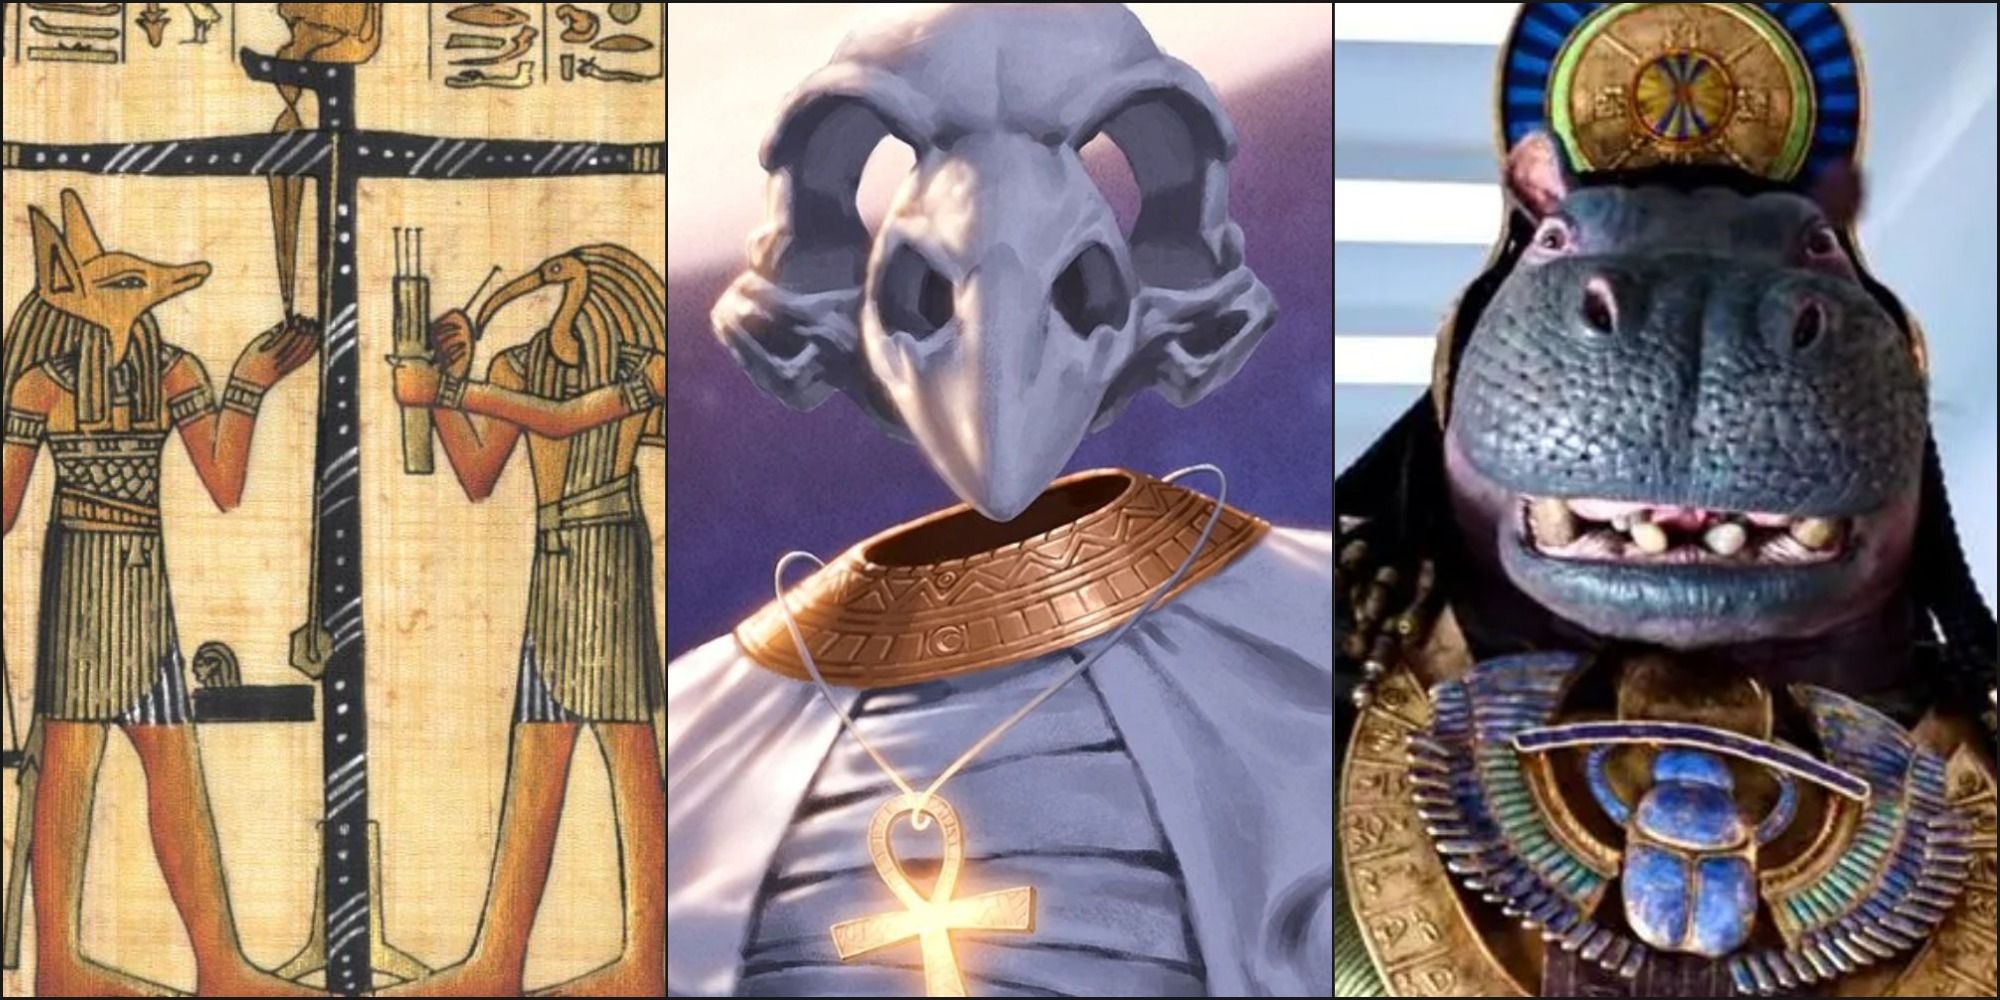 Moon Knight': Every Egyptian God Mentioned And Their Place In Mythology